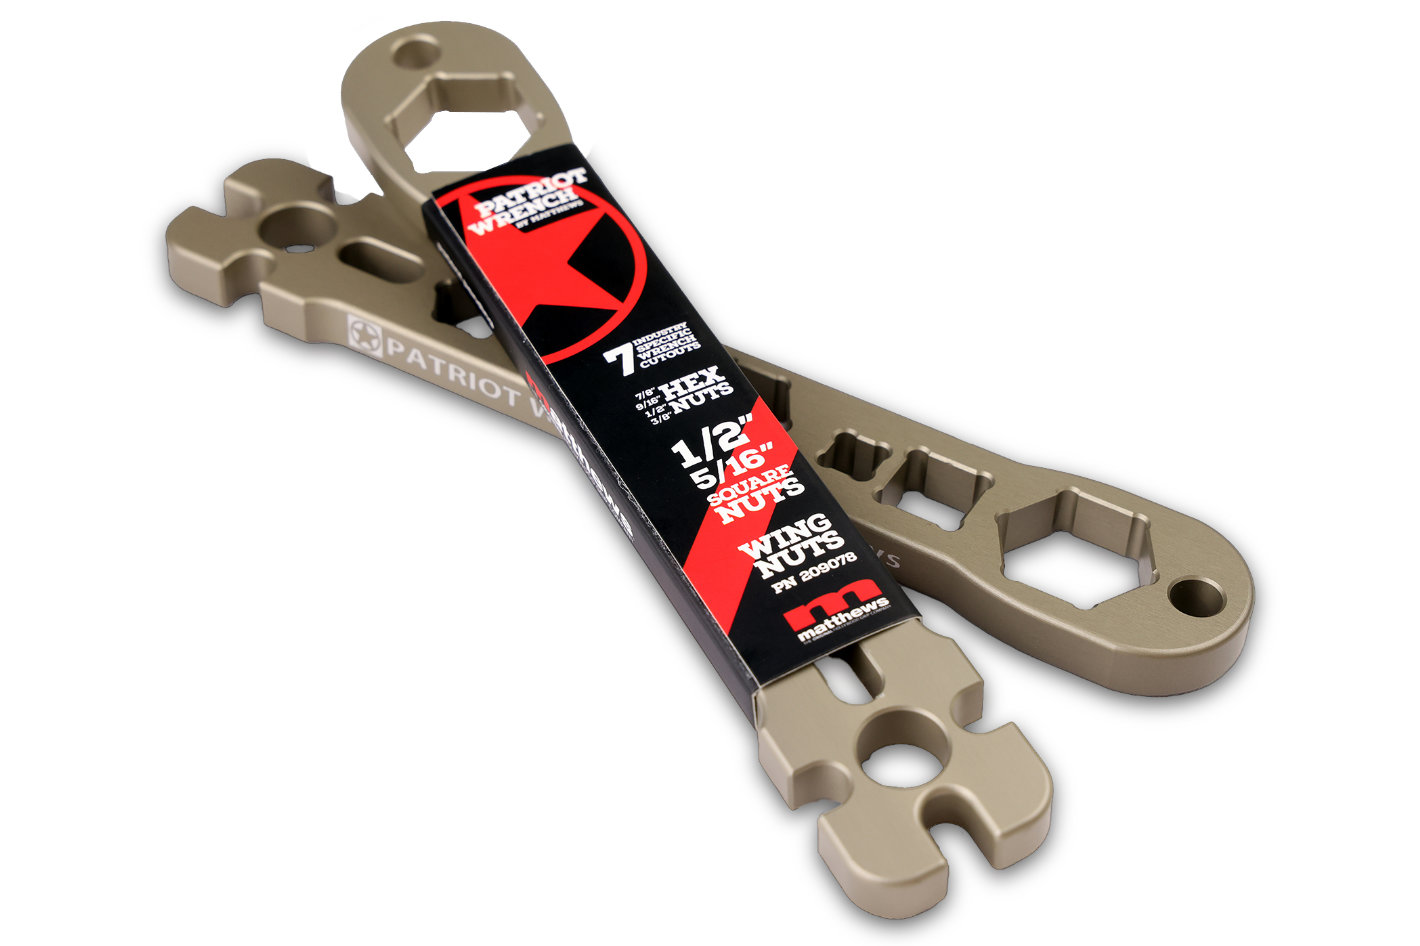 Patriot Wrench, the new tool from Matthews Studio Equipment